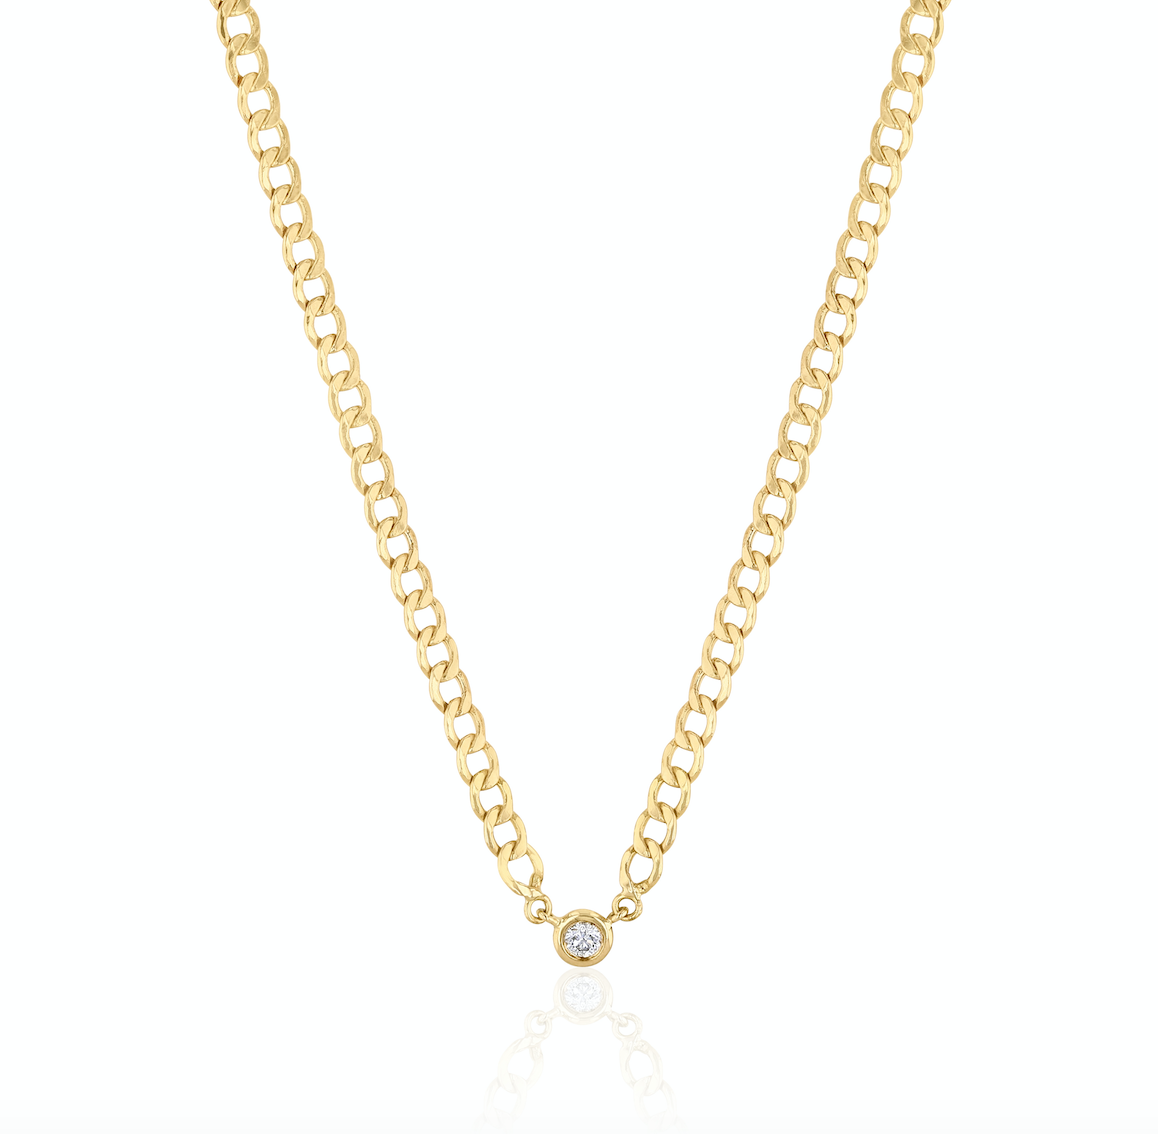 Sparkled Thin Chain Reaction Necklace